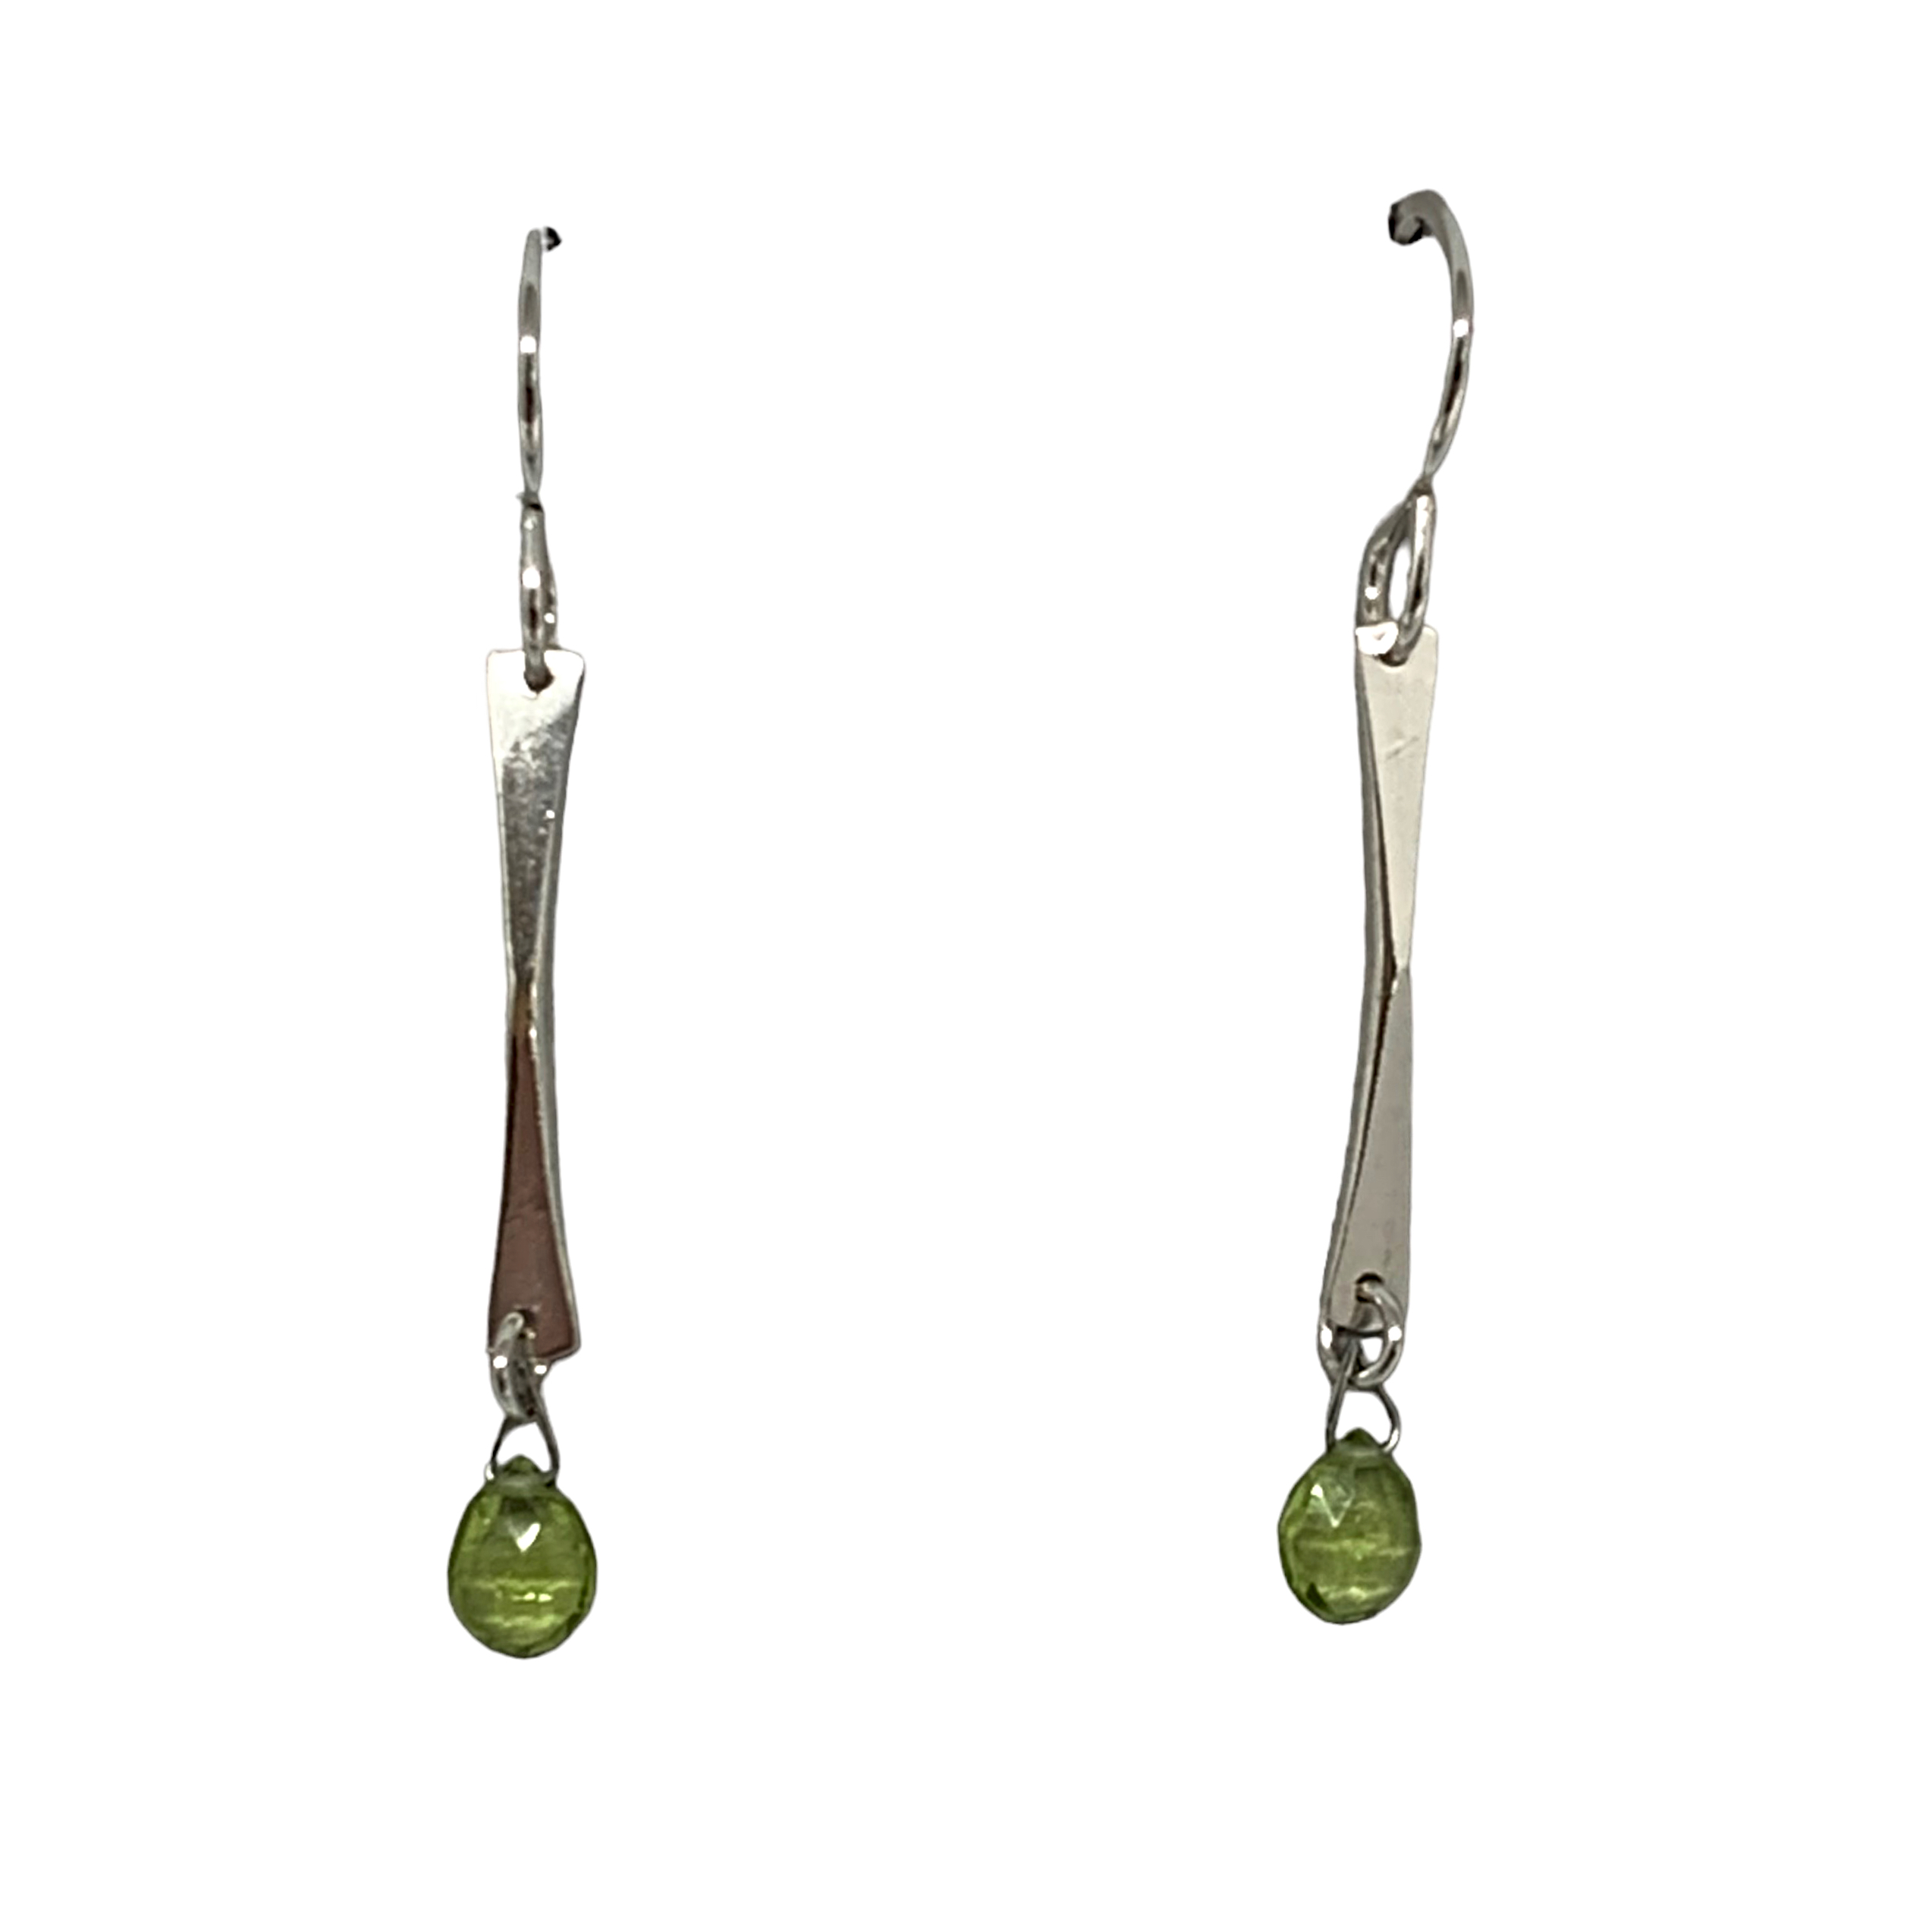 Handmade silver + peridot earrings by A&R Jewellery at Effusion Art Gallery in Invermere, BC.